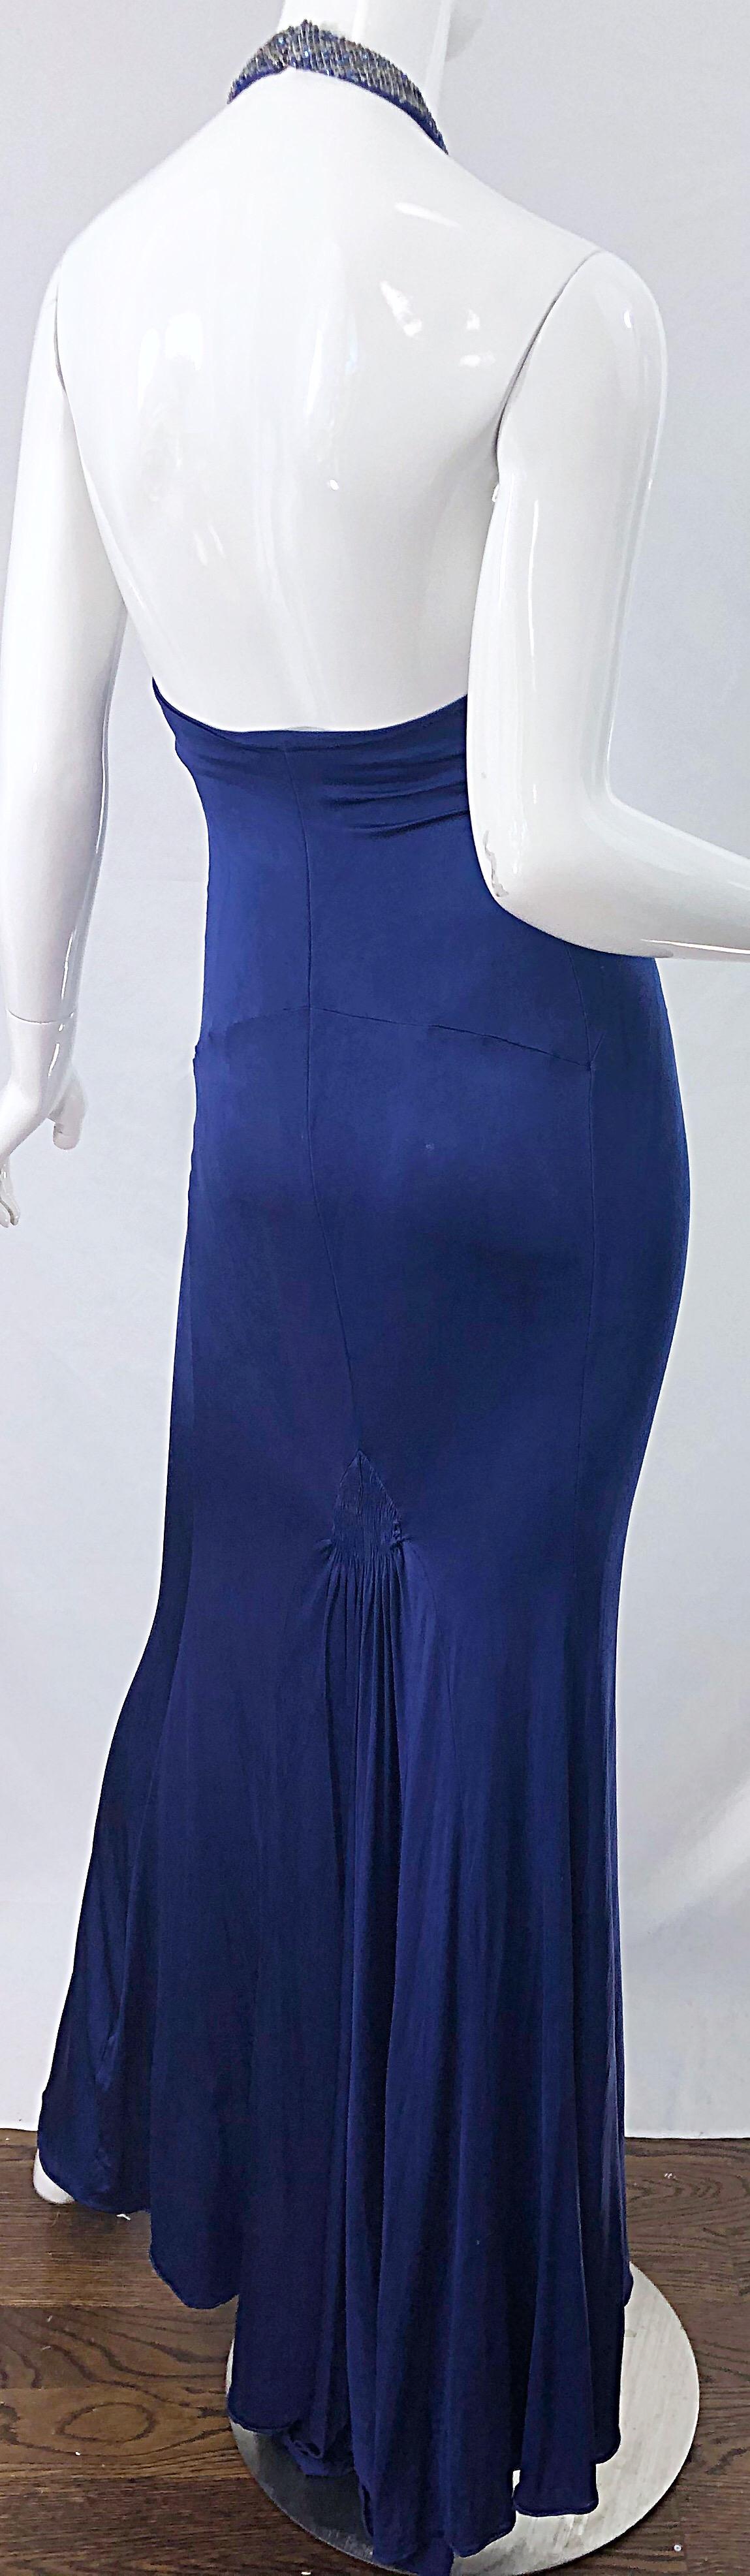 1990s Roberto Cavalli Does 1930s Blue Beaded Cut Out Vintage 90s Jersey Gown 5